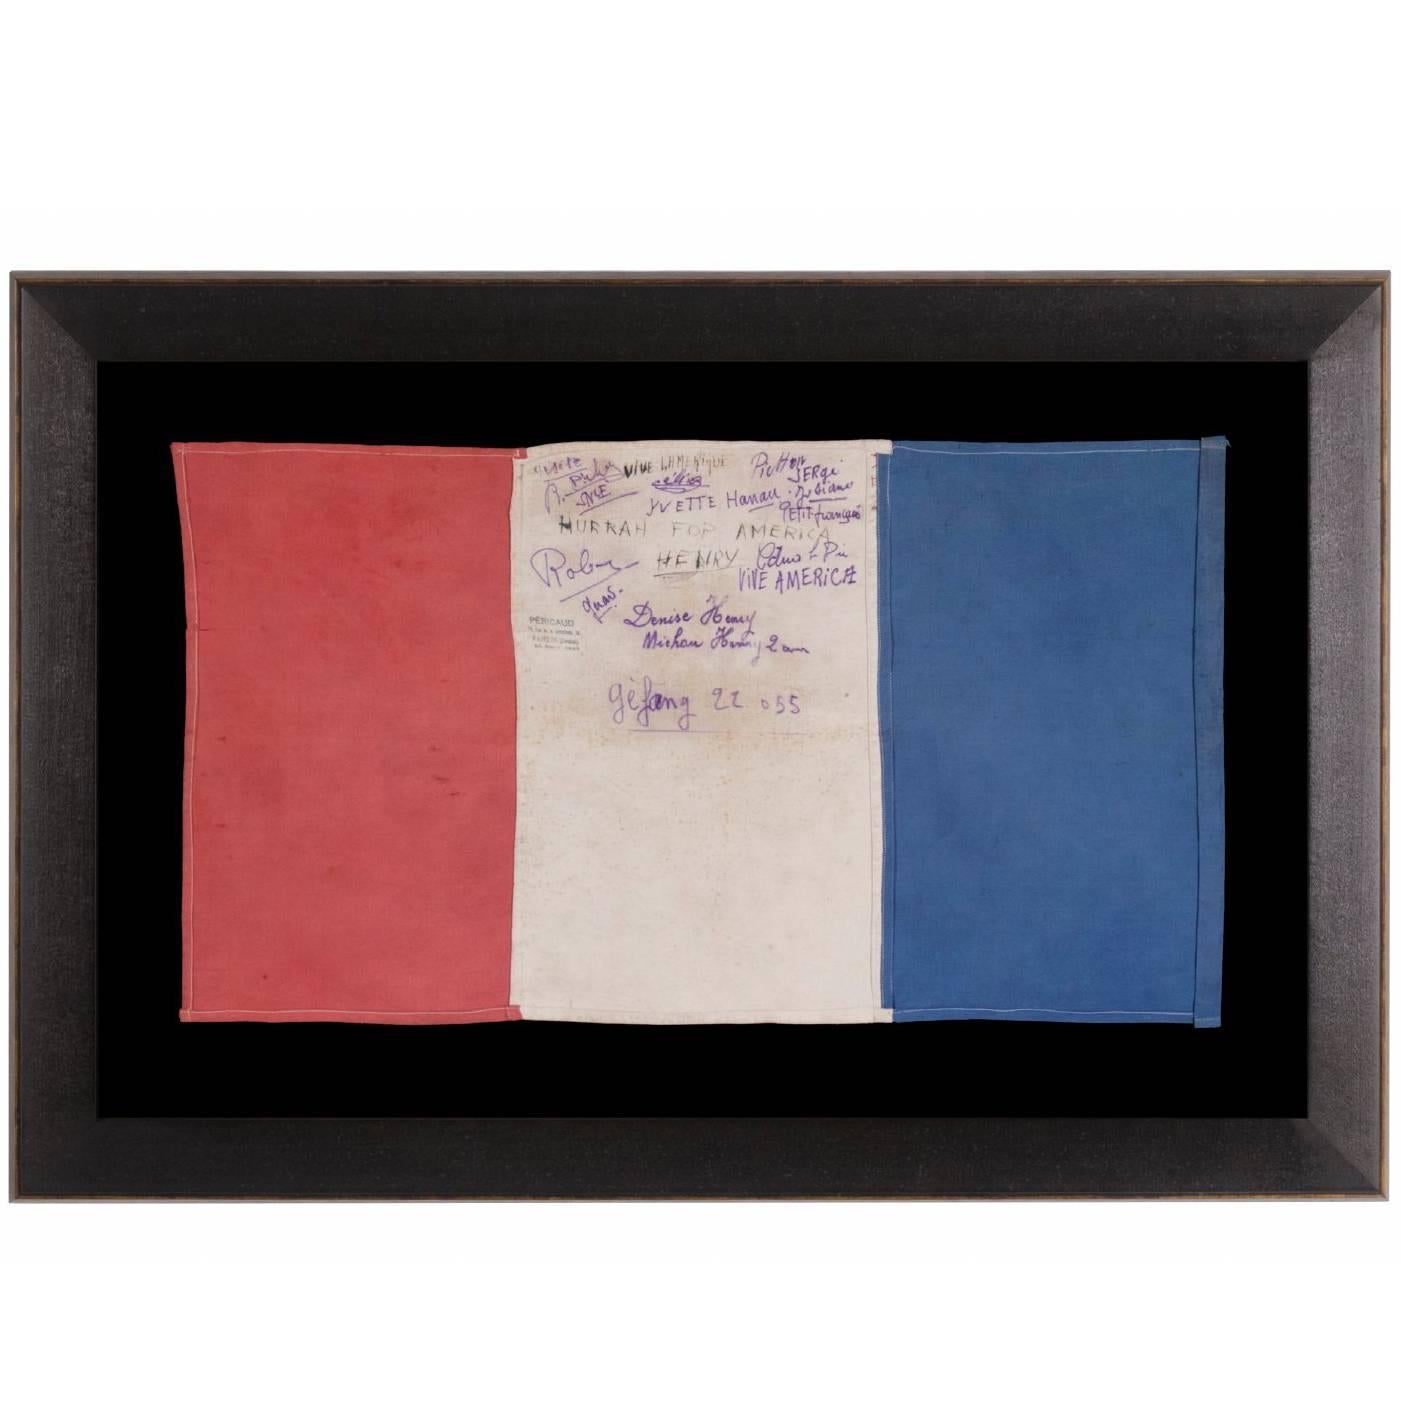 WWII French Liberation Flag with American Saluations "Hurrah for America"